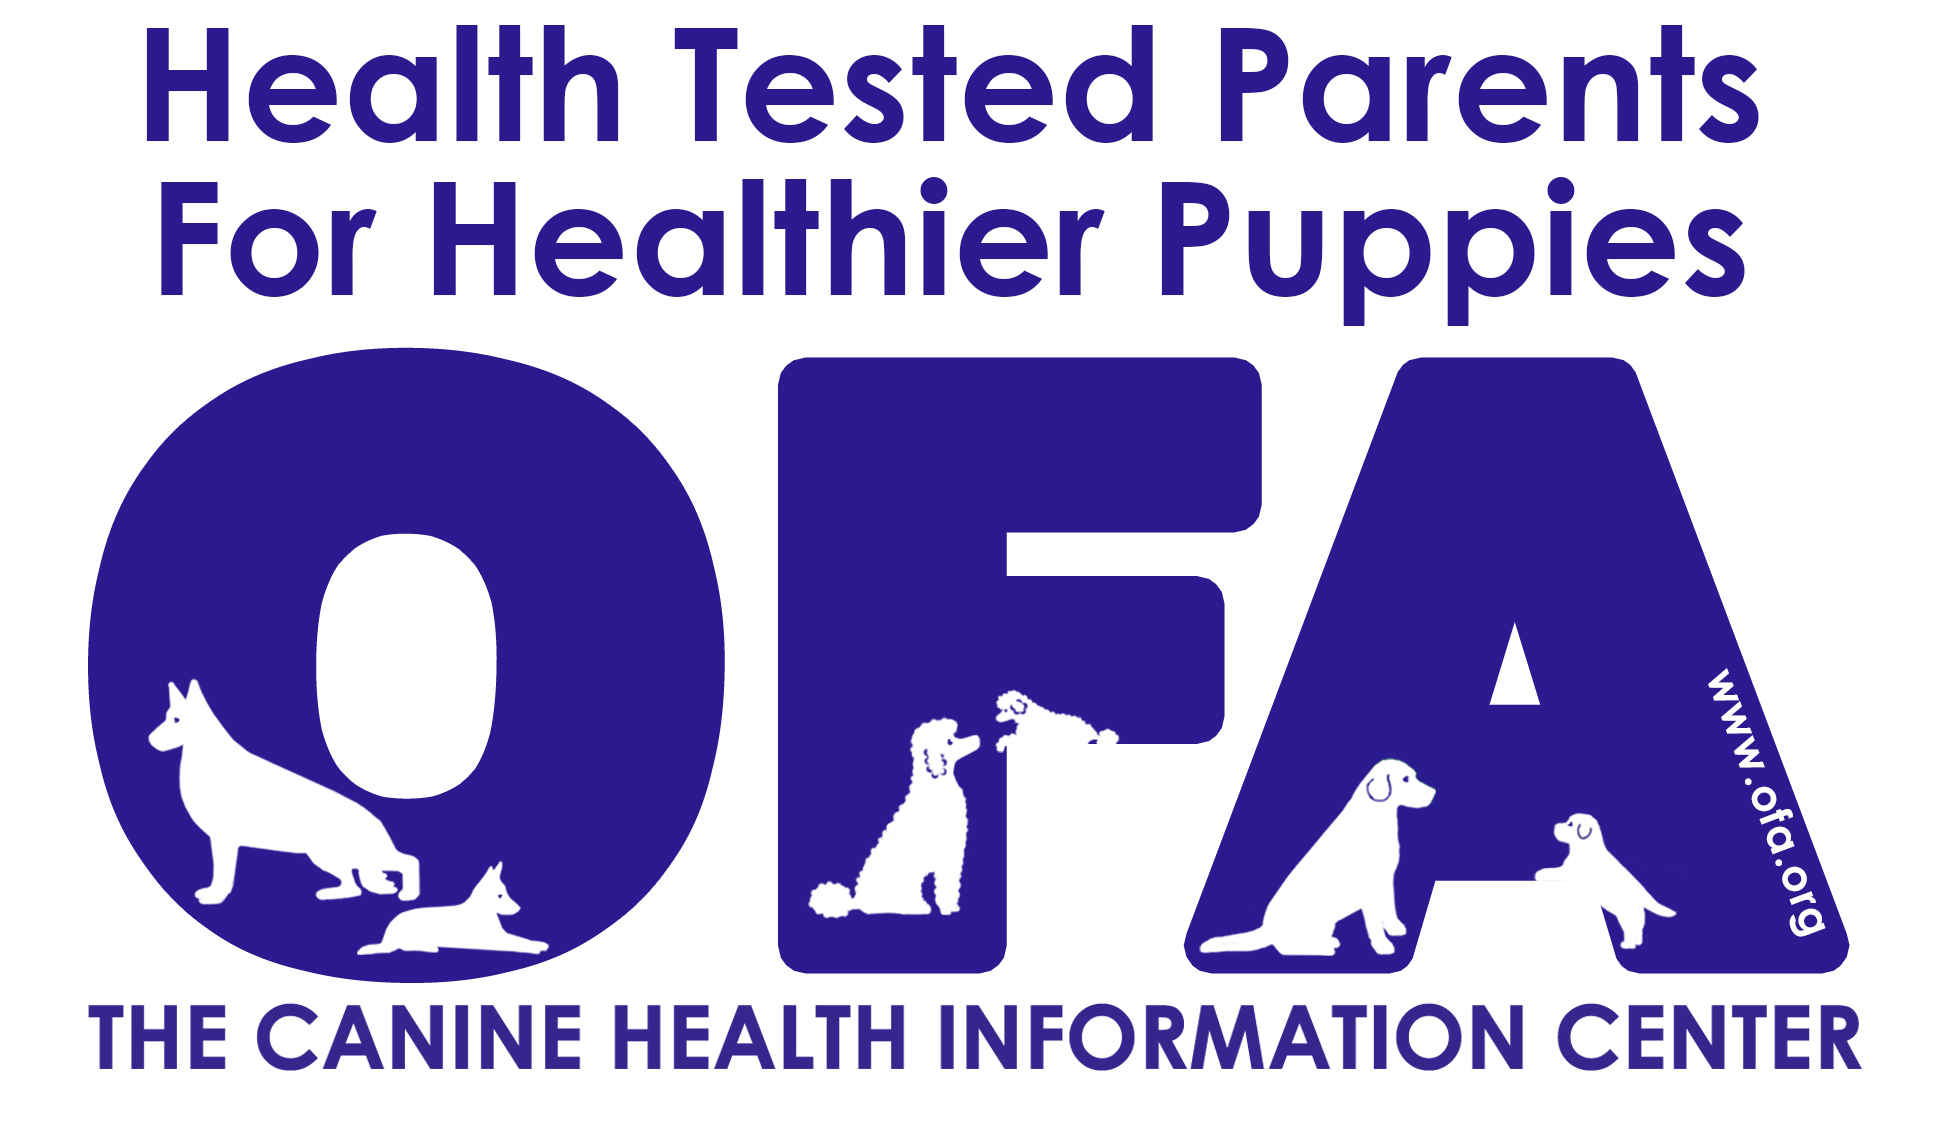 Health Tested Parents for Healthier Puppies